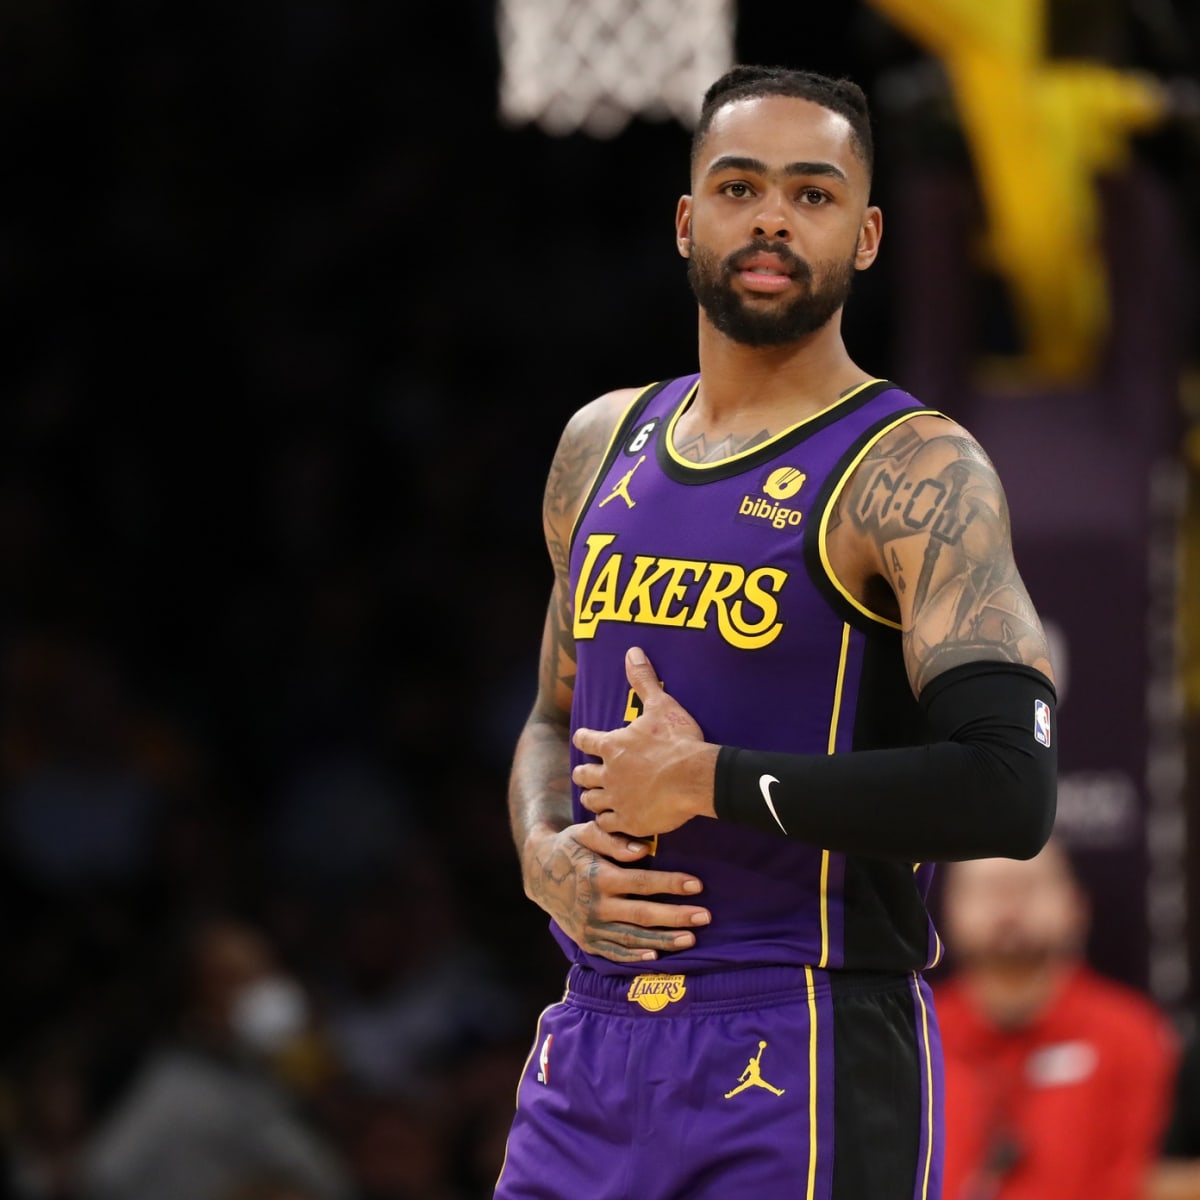 Former Ohio State Star D'Angelo Russell to Stay With Los Angeles Lakers